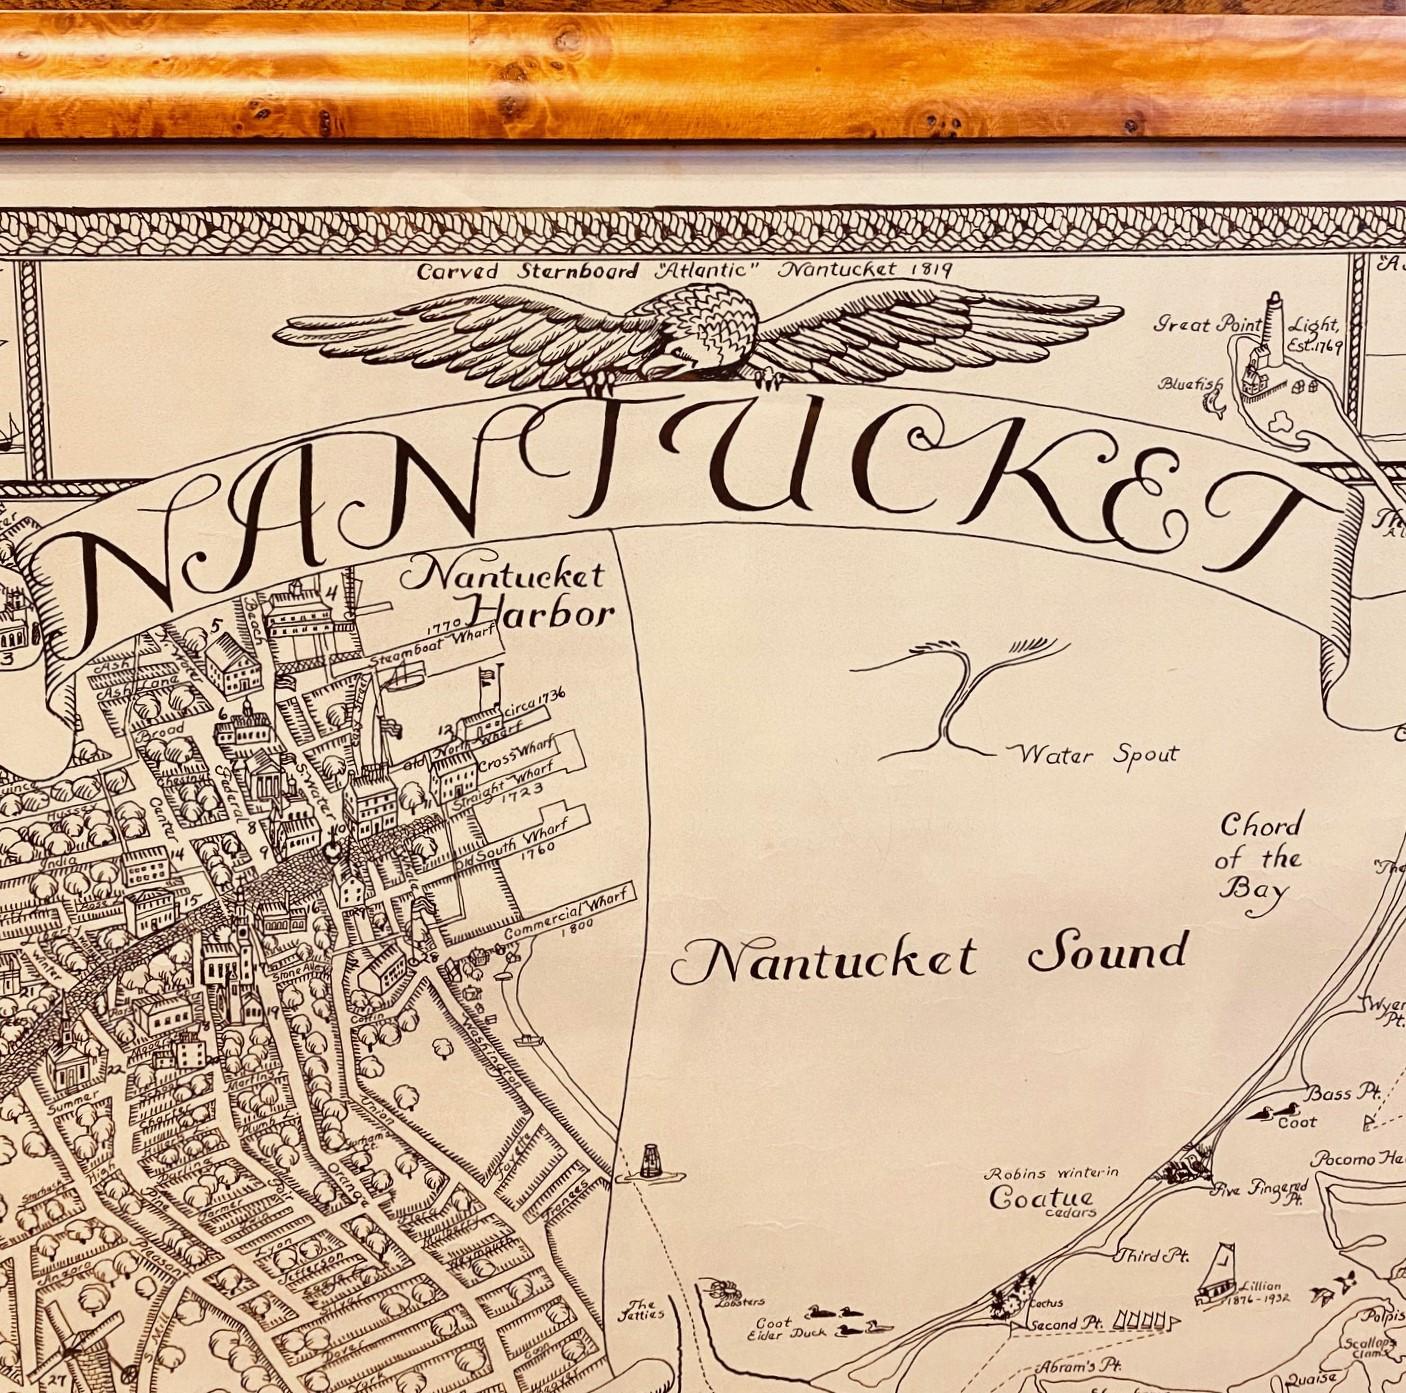 Vintage Map of Nantucket Town by Ruth Haviland Sutton, 1946, a classic vintage tourist map of Nantucket Island showing historic landmarks and geographic details along with decorative images, and featuring an enlargement of Nantucket Town with street